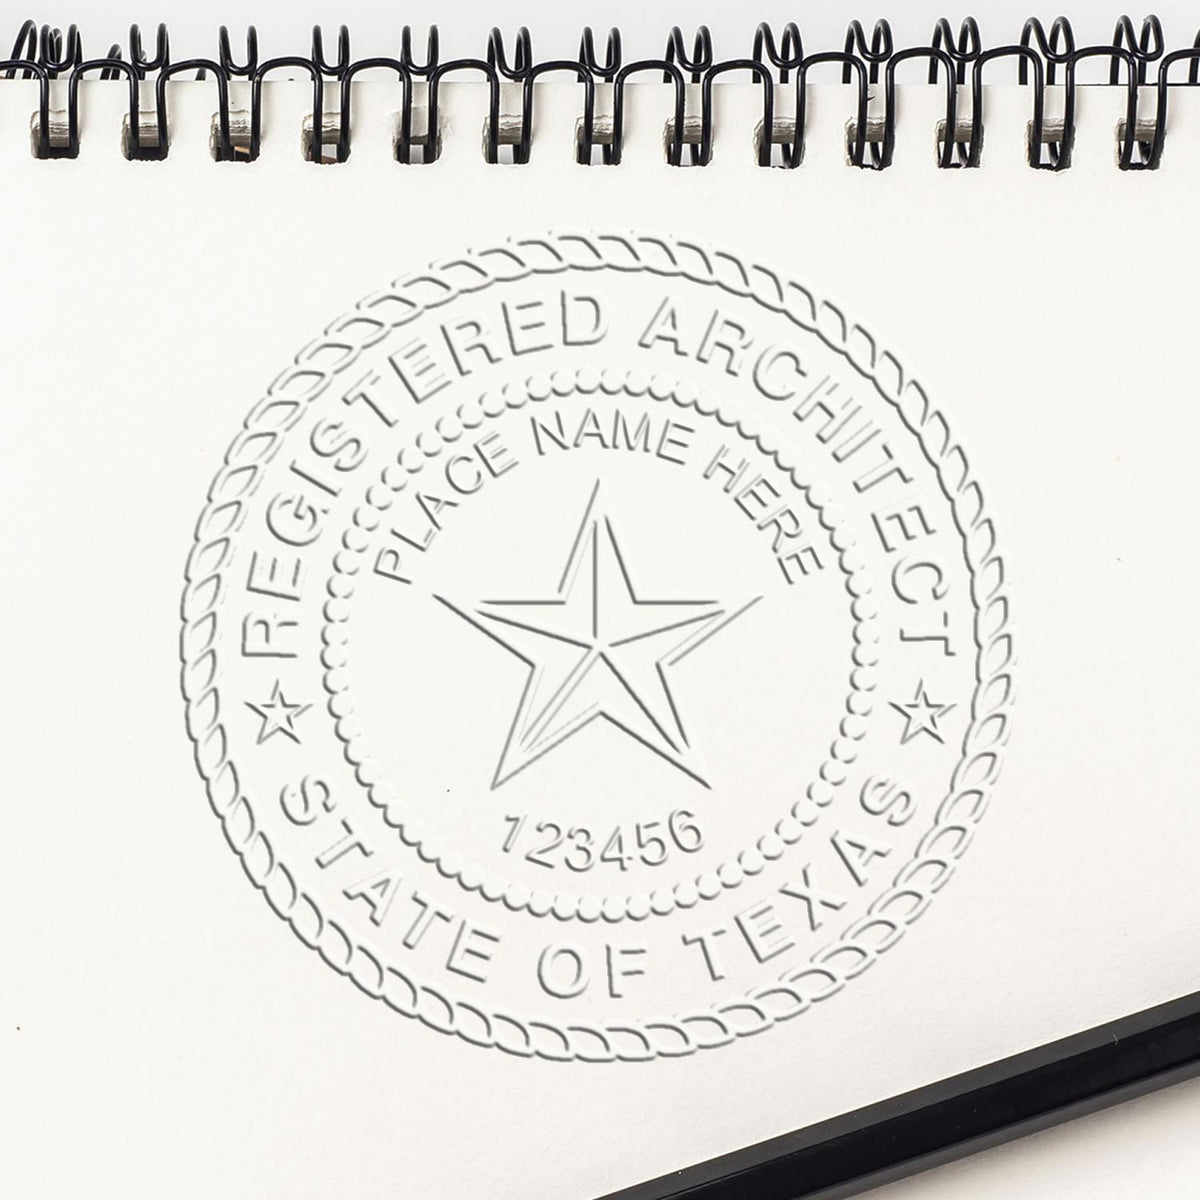 The State of Texas Long Reach Architectural Embossing Seal stamp impression comes to life with a crisp, detailed photo on paper - showcasing true professional quality.